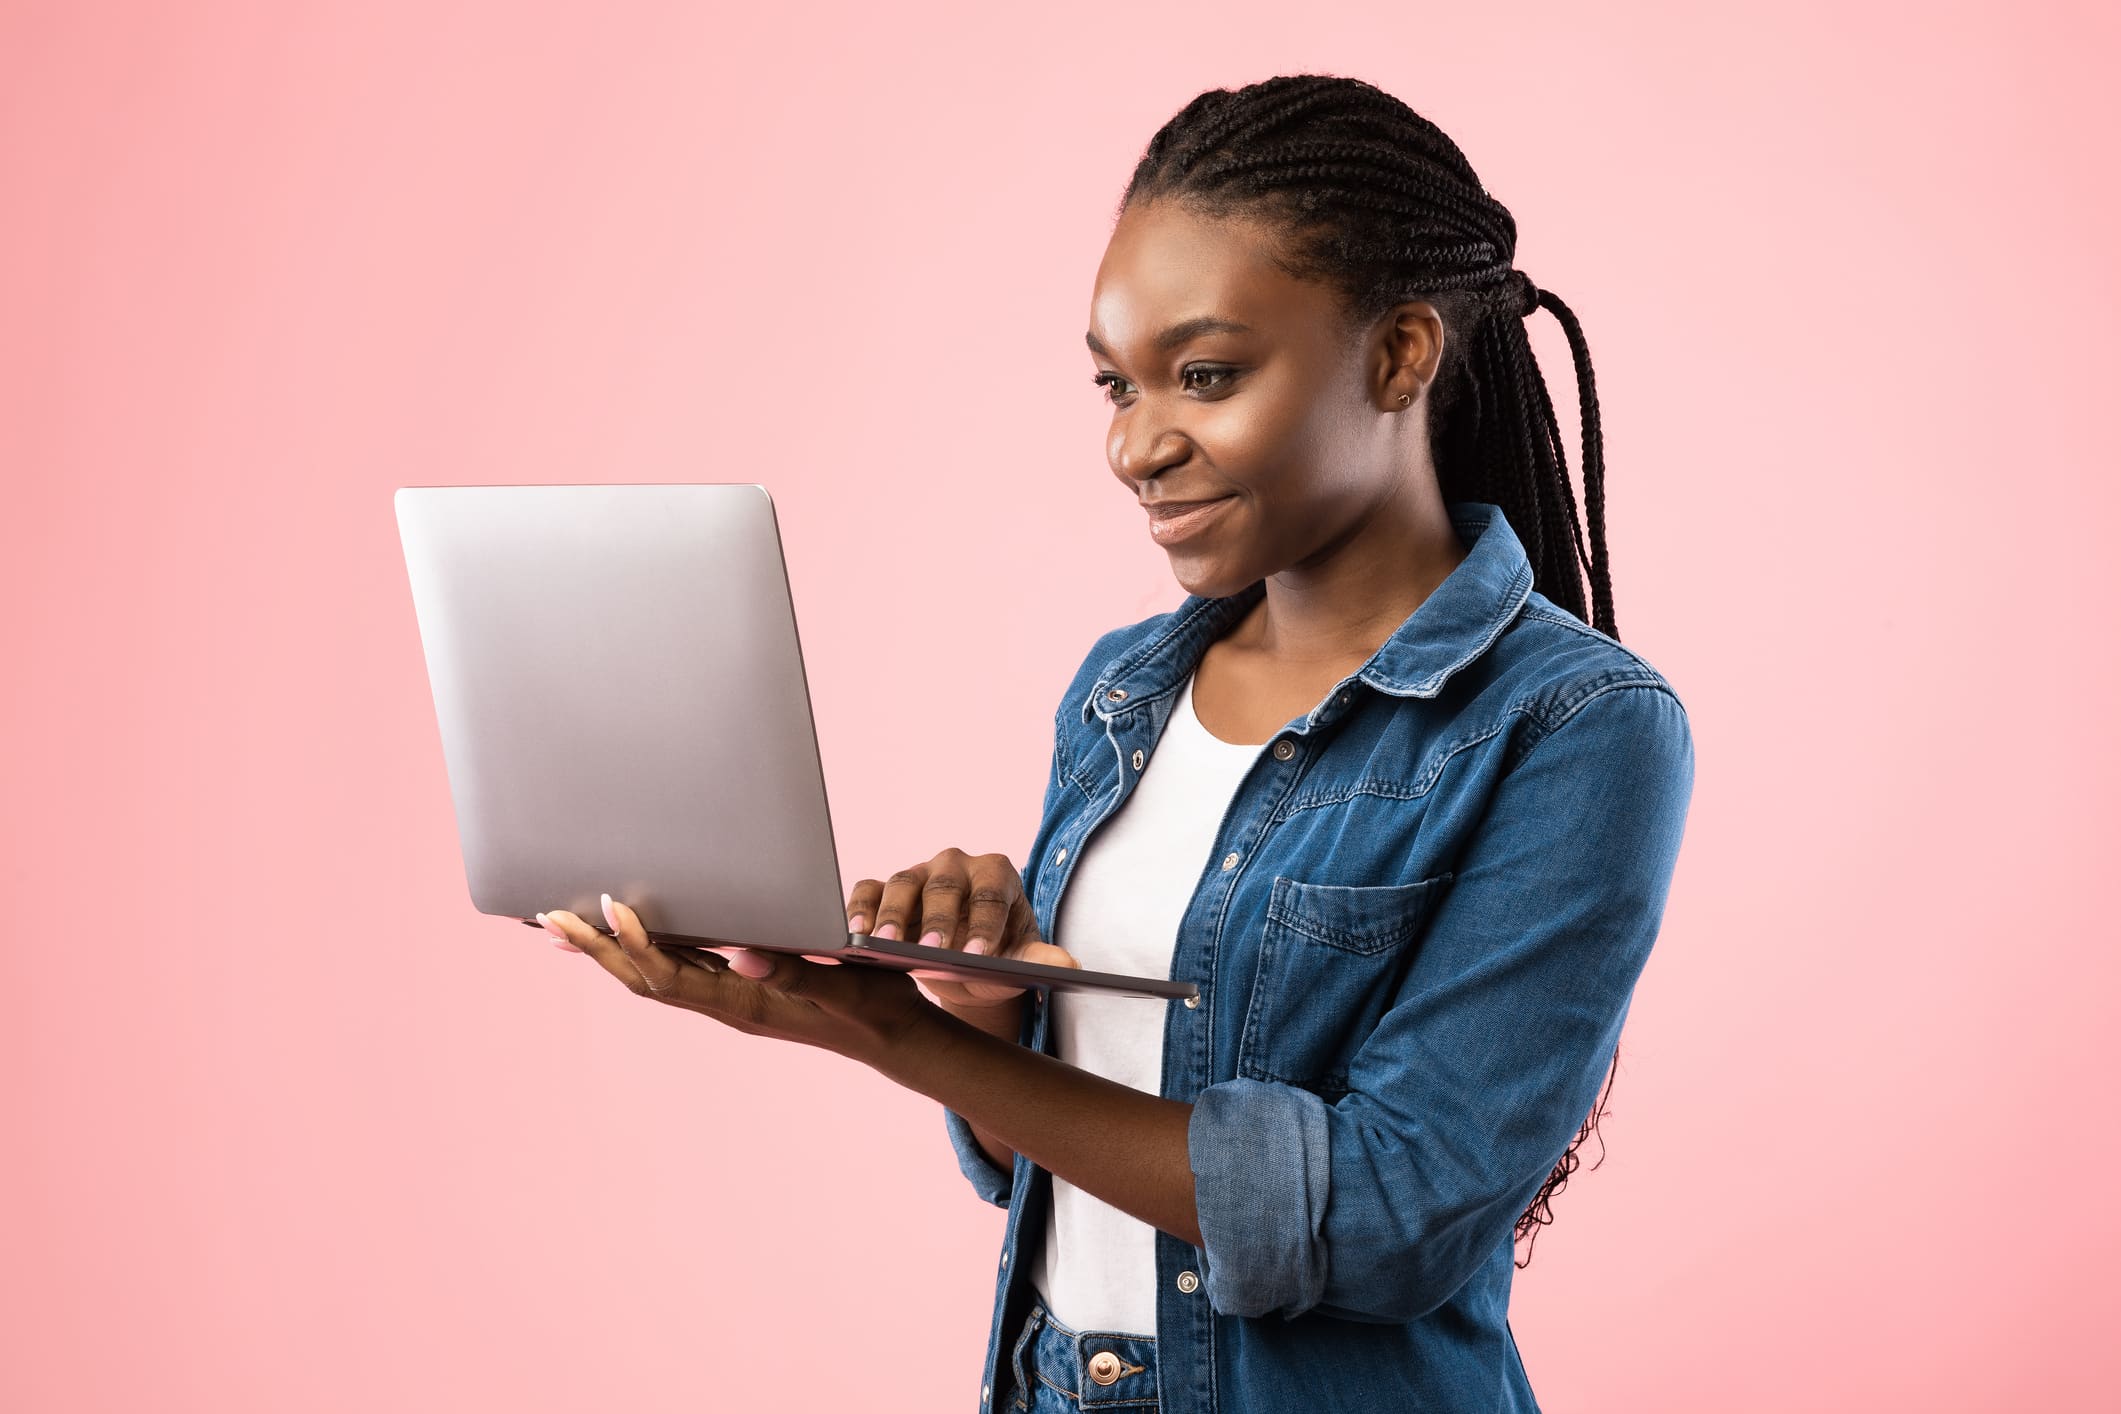 Black Student Girl Holding Laptop Computer Standing On Pink Background